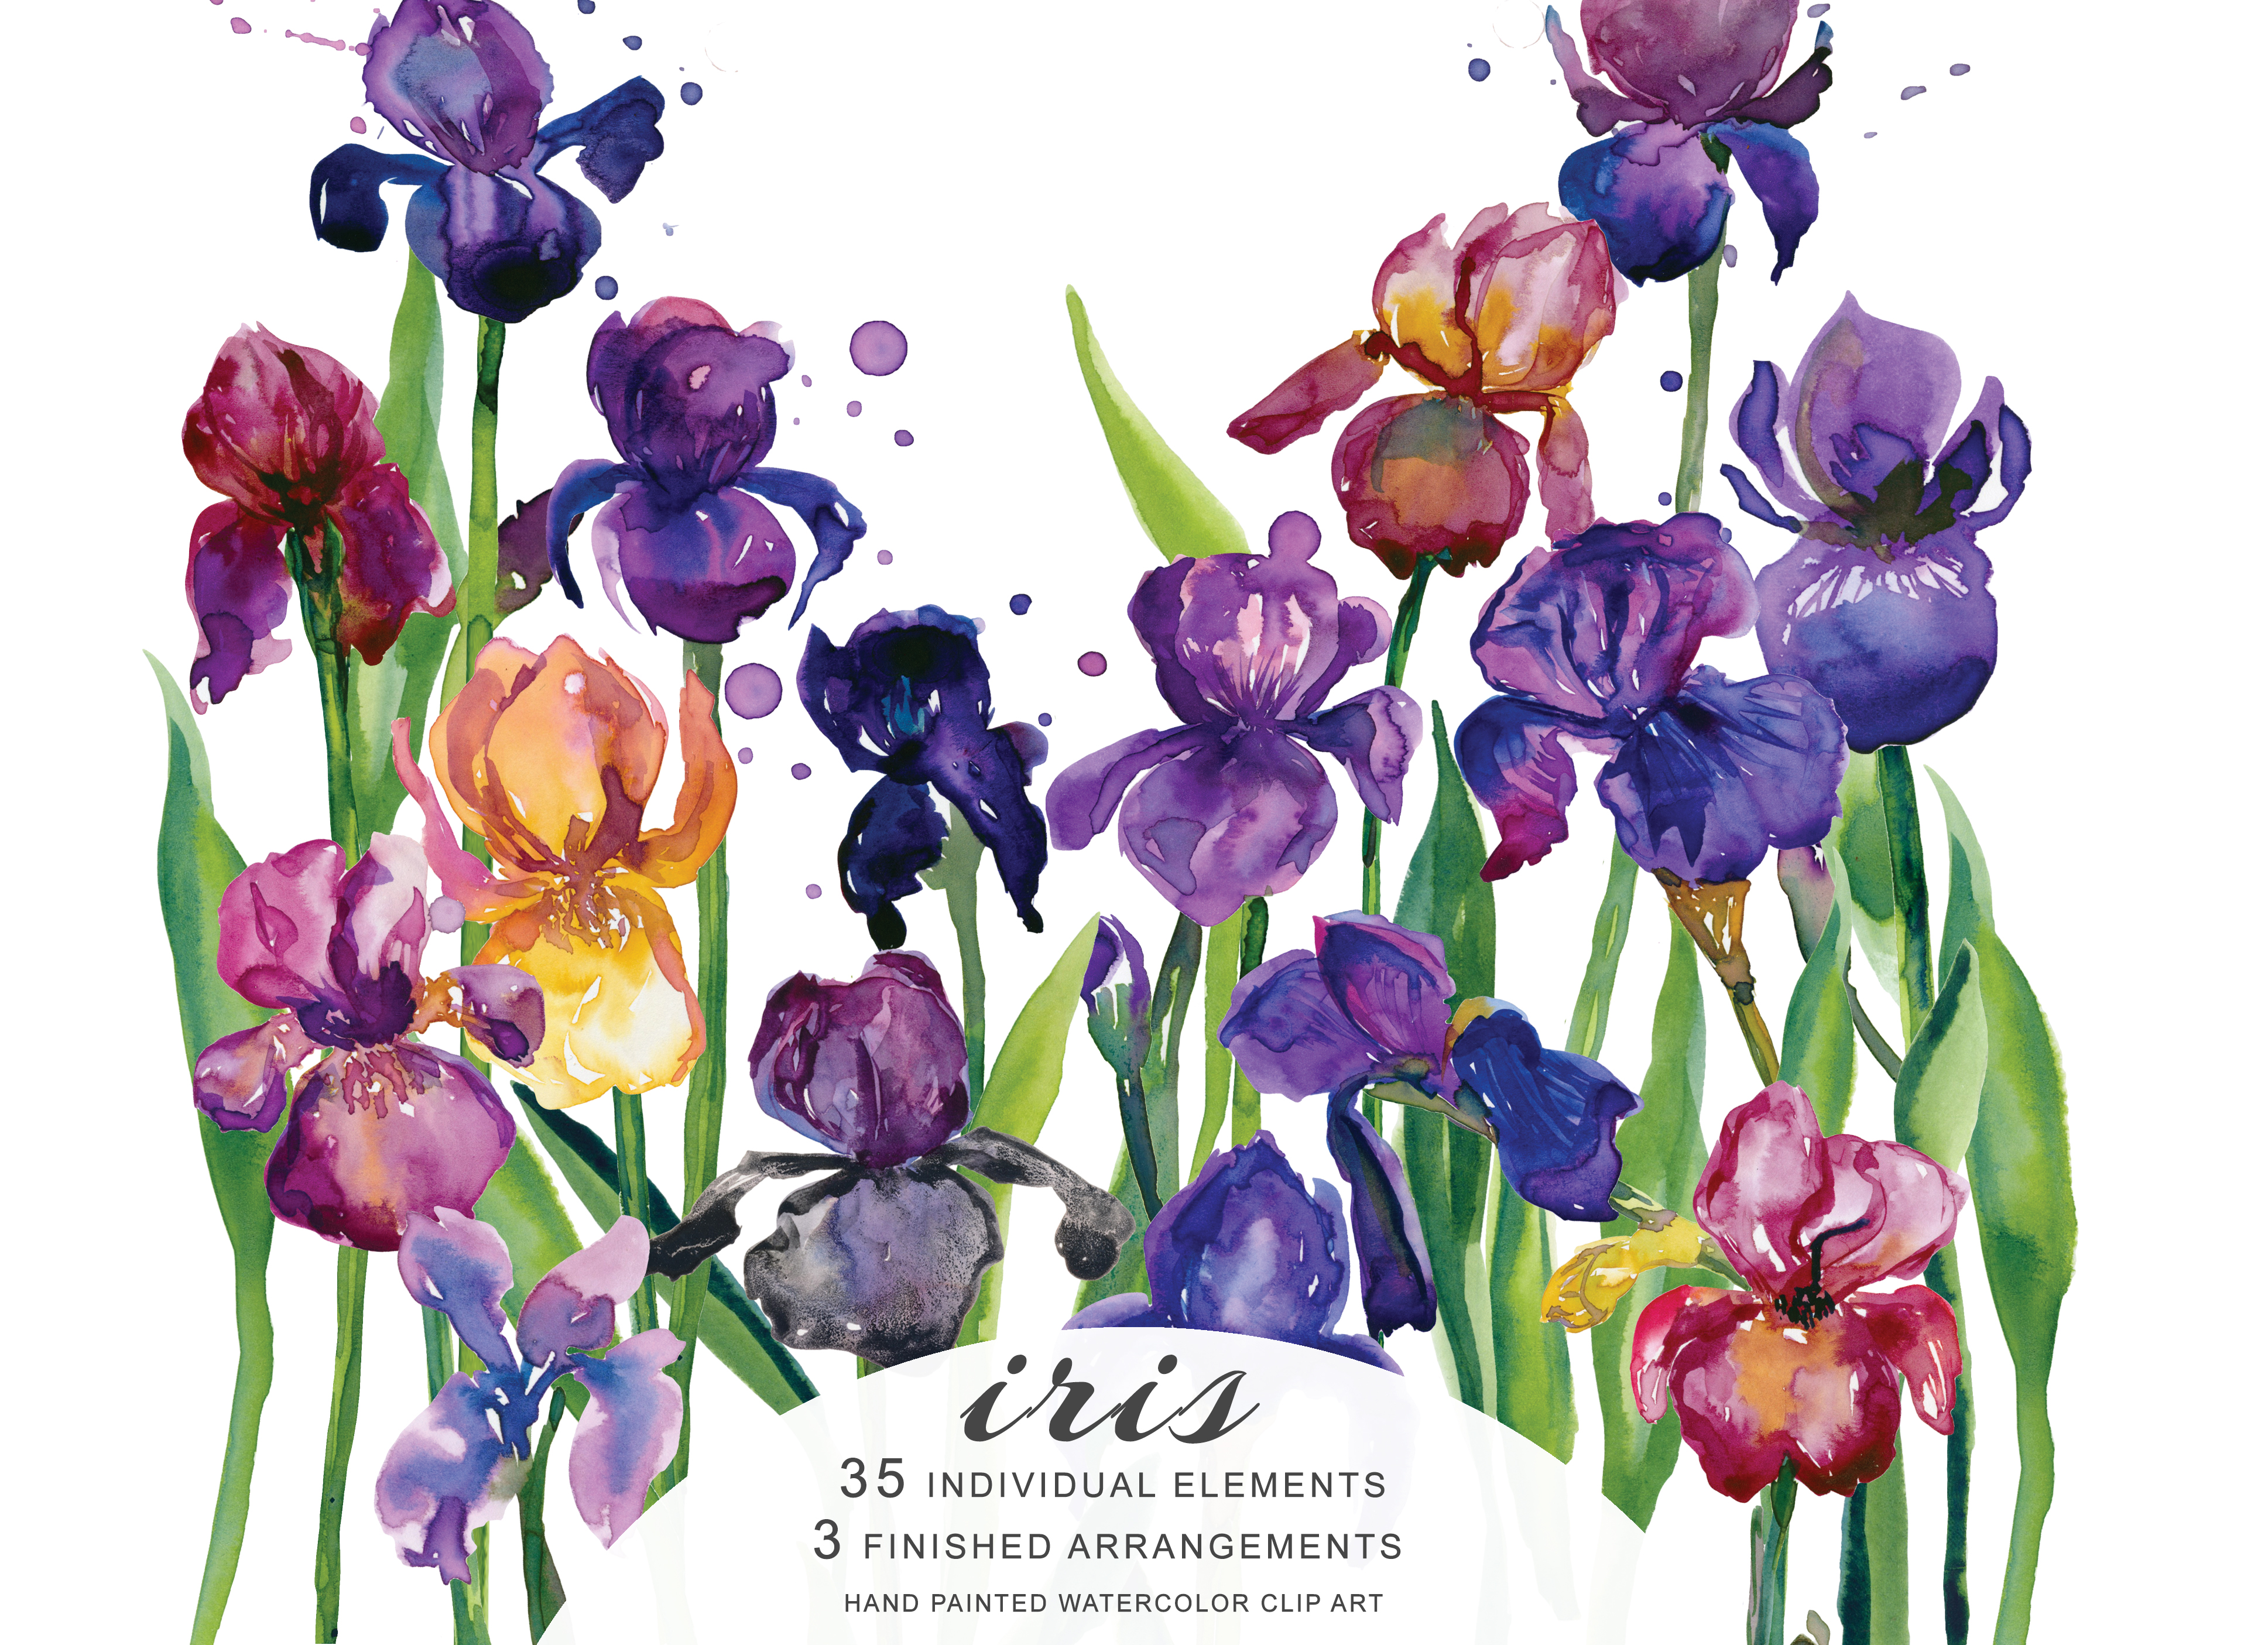 Hand Painted Watercolor Iris Flower Clipart